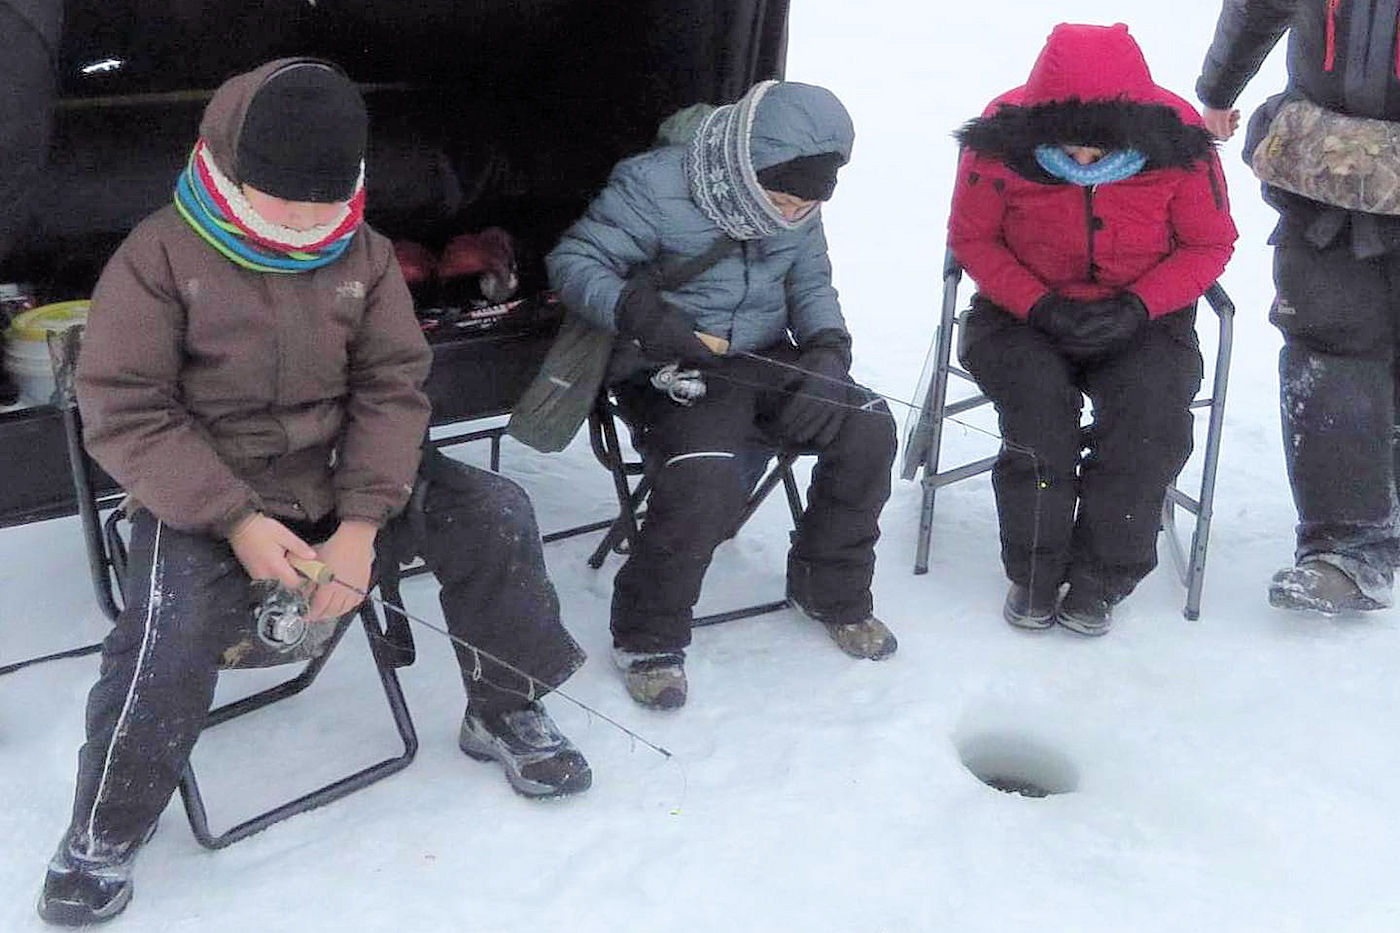 Tamarac Youth Ice Fishing Day - Detroit Lakes MN Winter Activity Guide - The Lodge on Lake Detroit